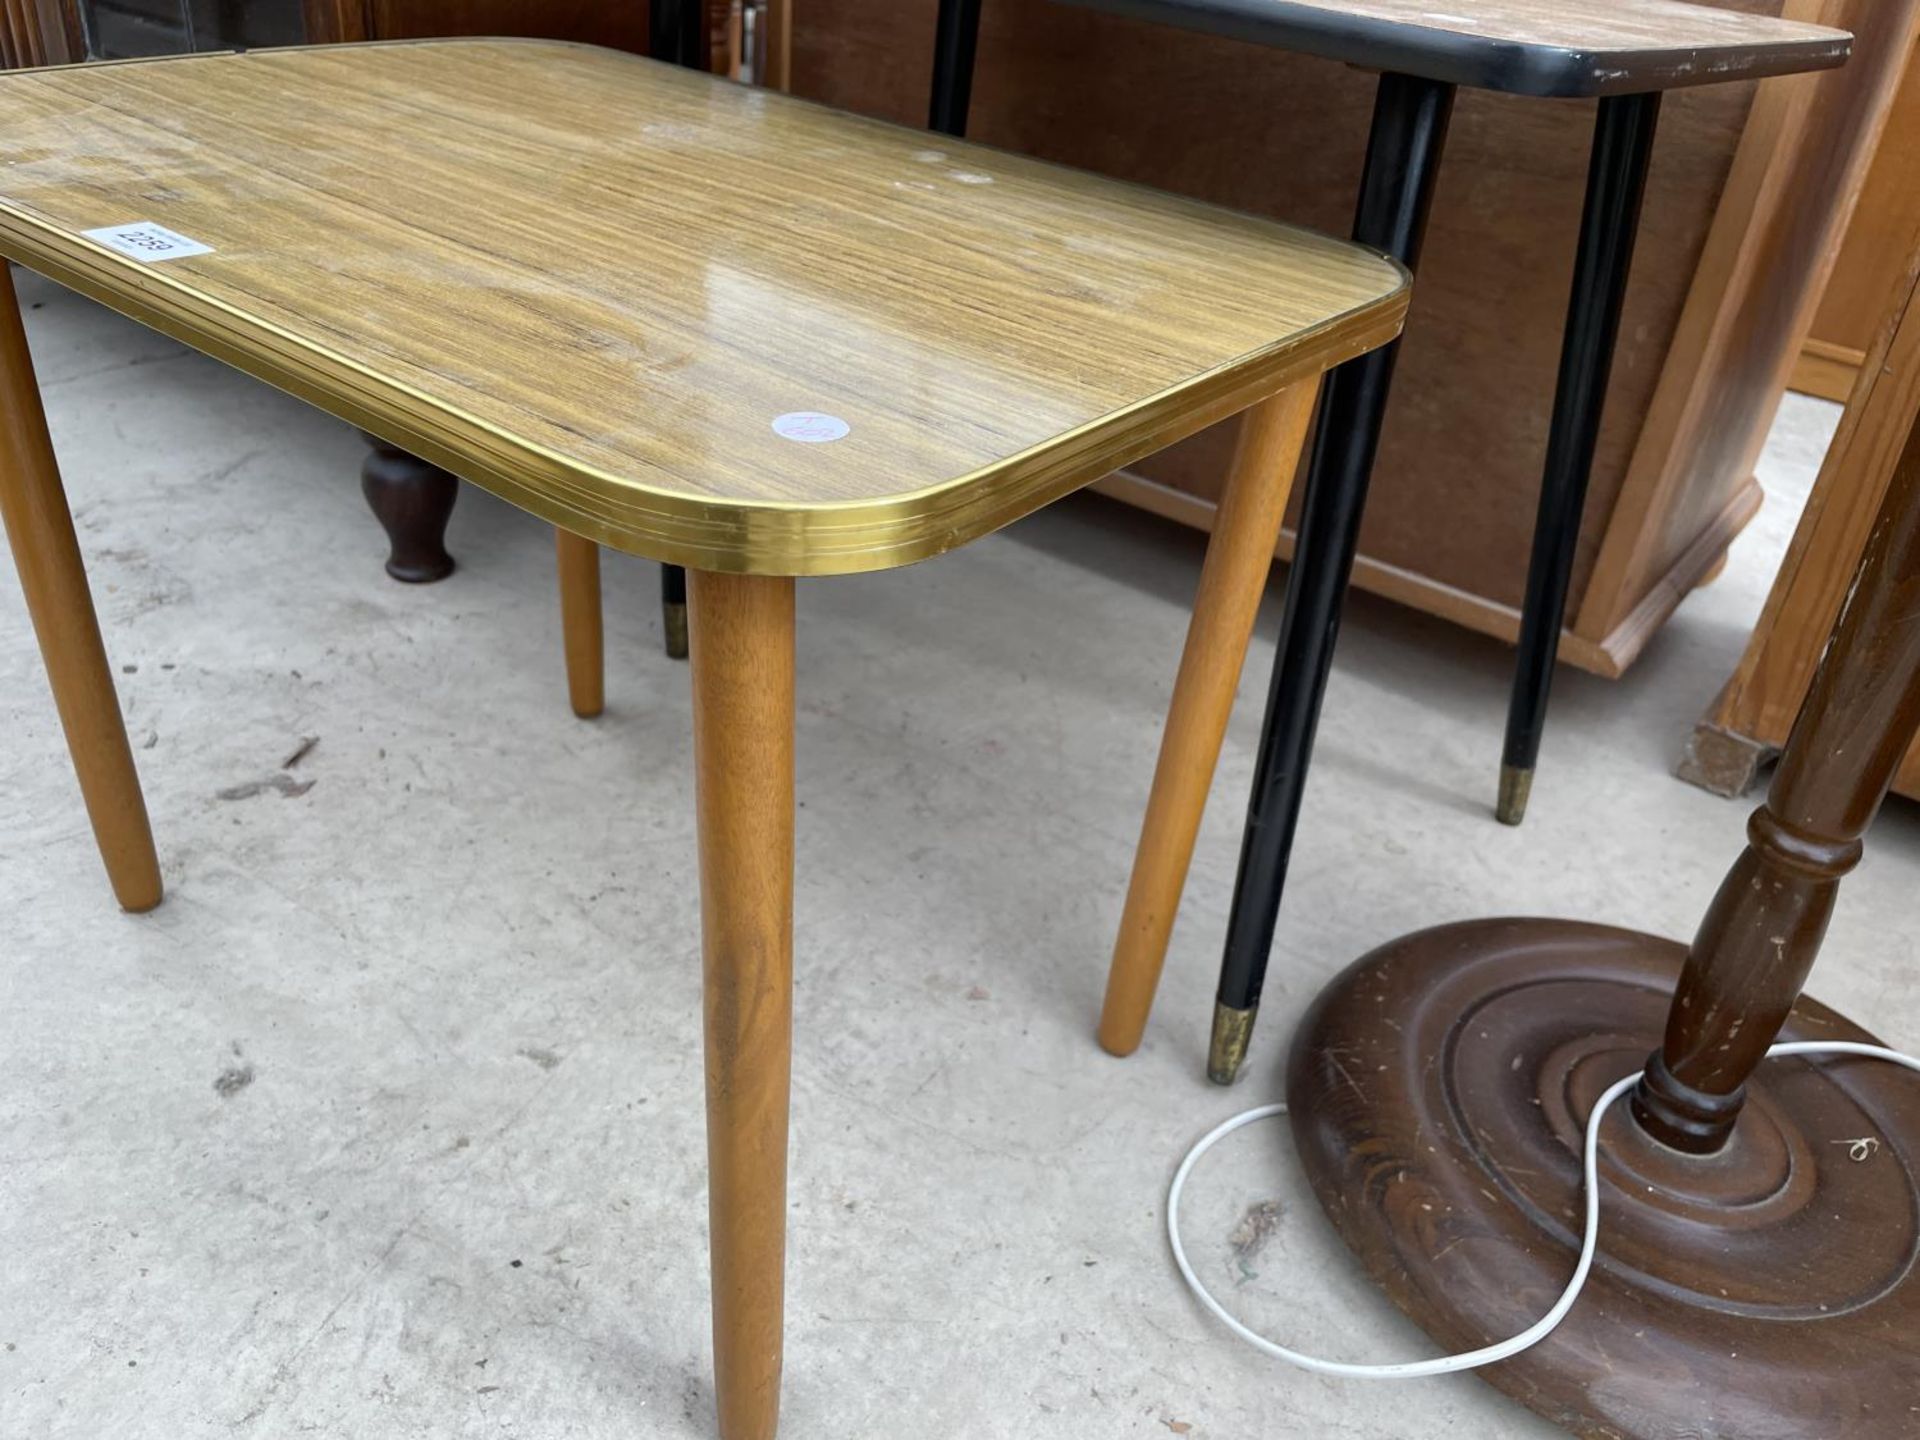 TWO MID 20TH CENTURY OCCASIONAL TABLES WITH FORMICA TOPS - Image 3 of 3